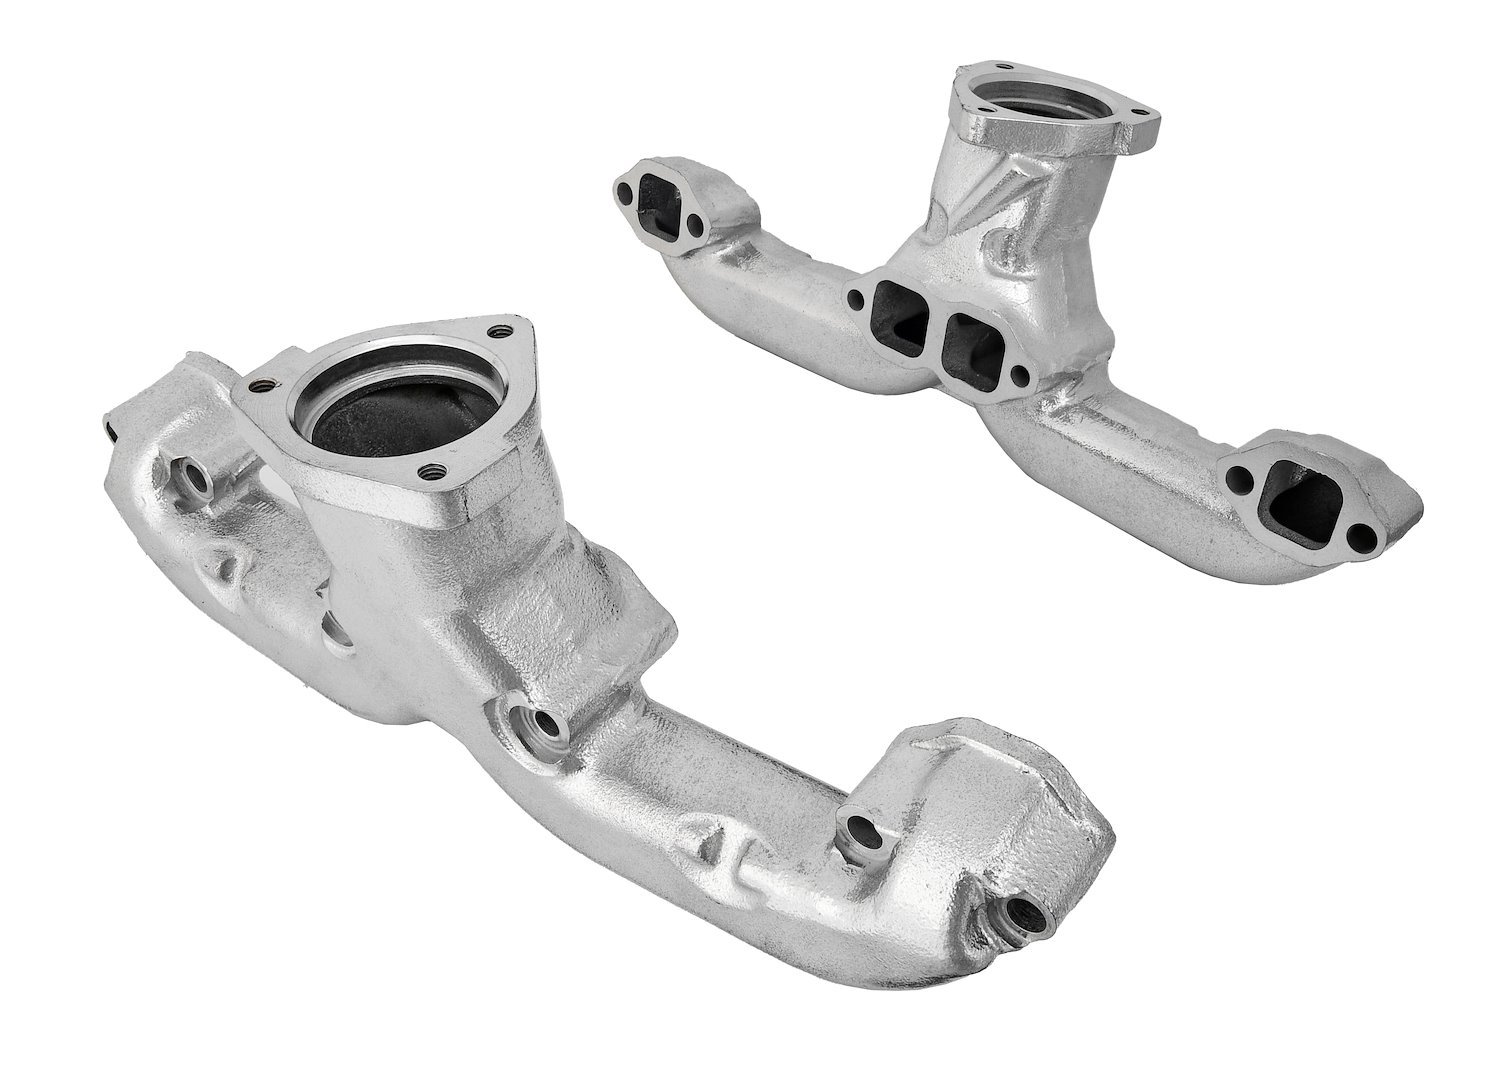 Silver Ceramic Coated Rams Horn Style Exhaust Manifolds